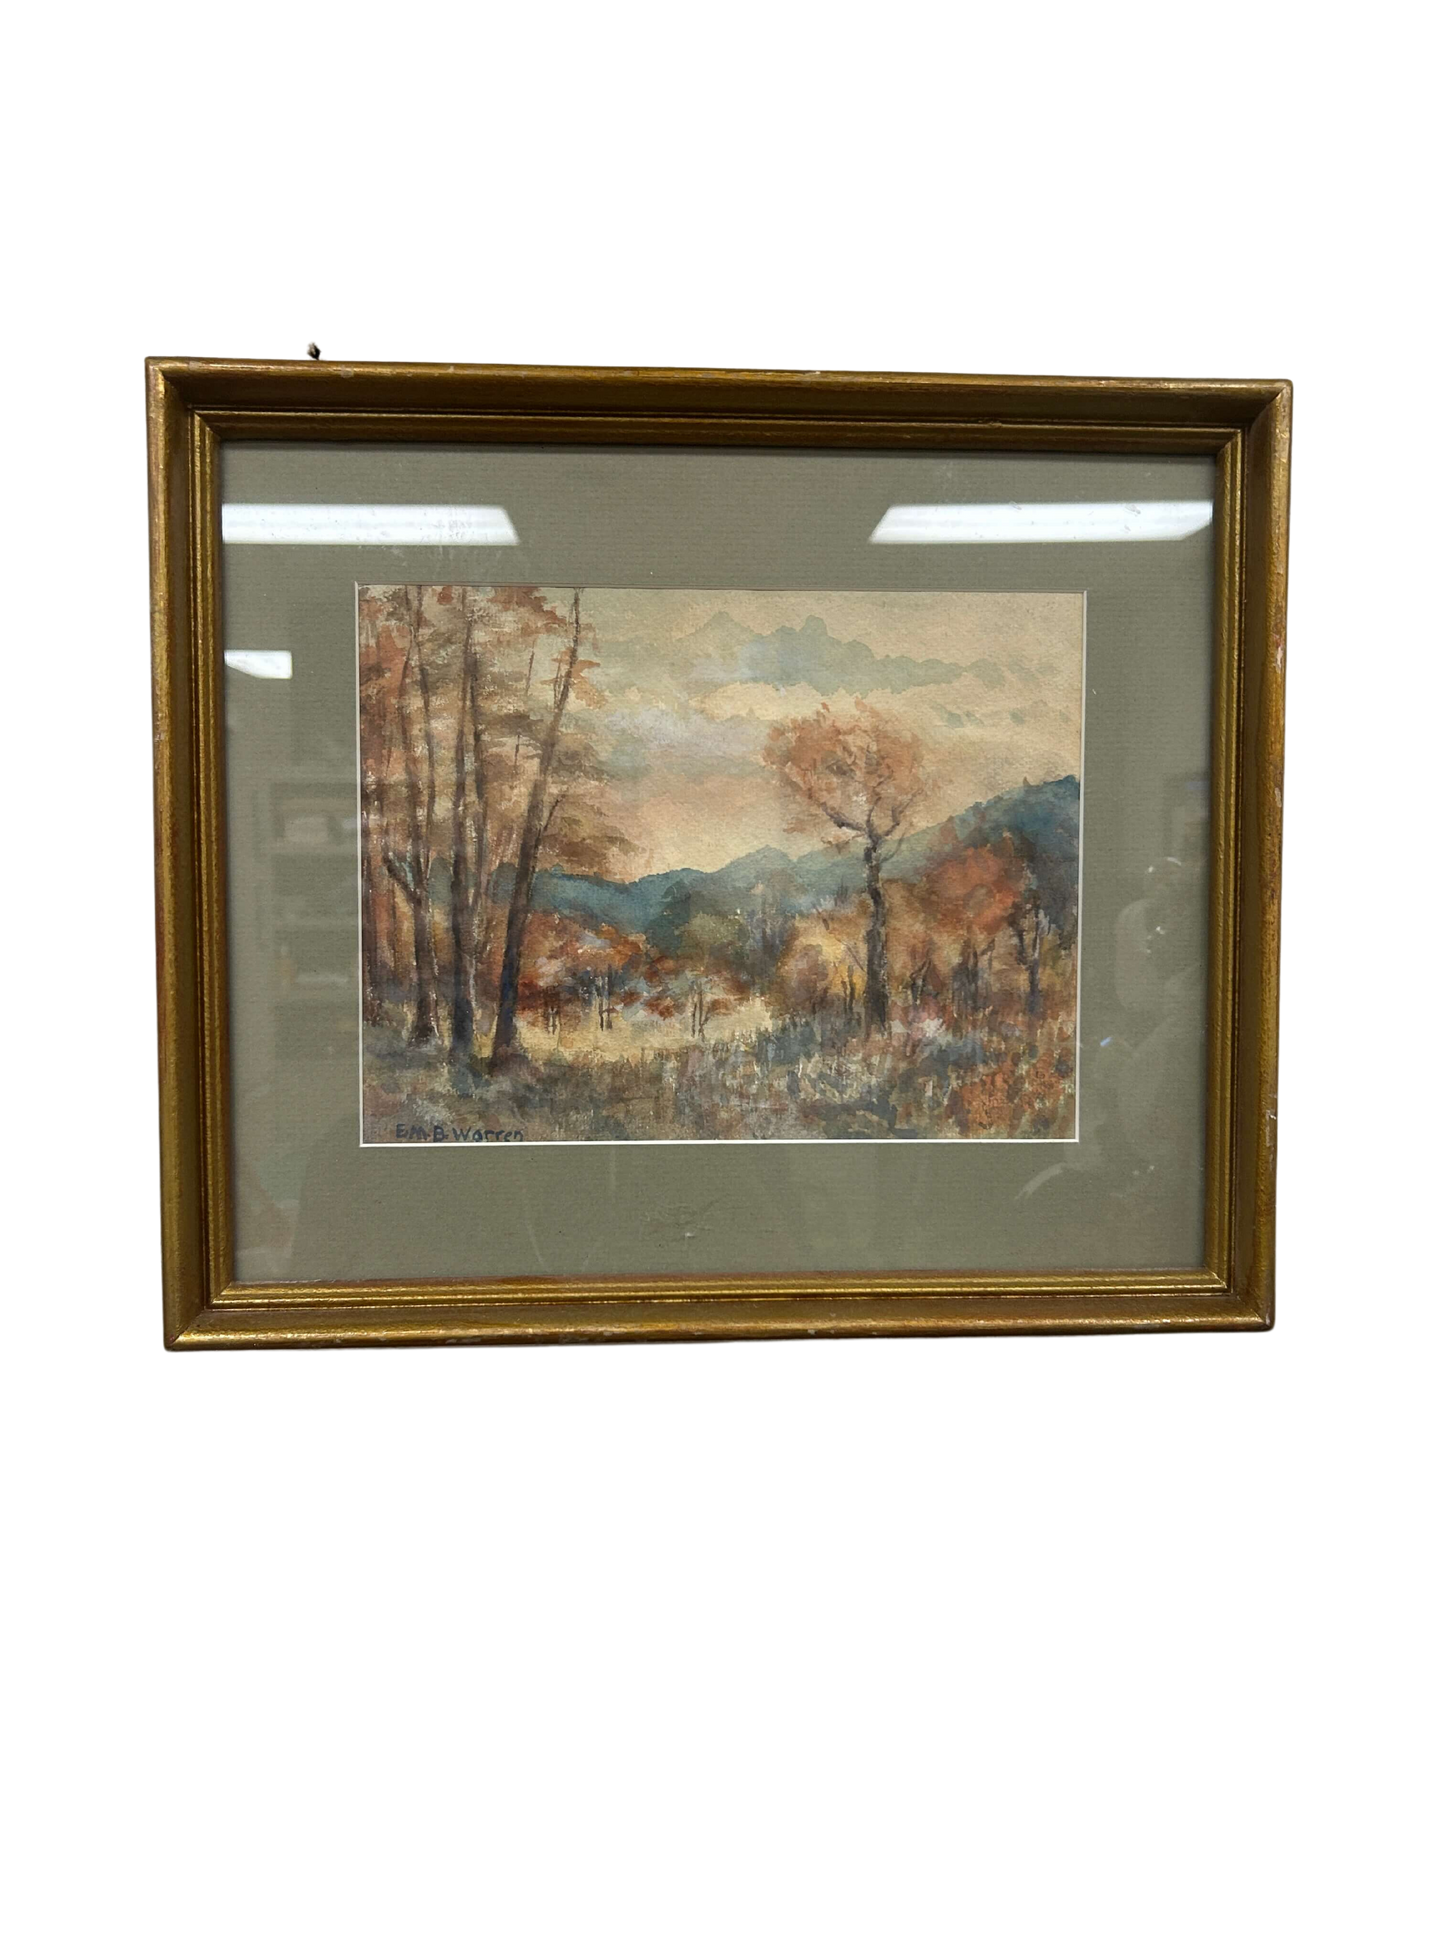 Framed watercolor artwork showcasing a serene landscape of forest, mountain, and grass in brown hues, reflecting the artist's mastery in capturing nature's depth and tranquility.Available at the hearing clinic at Allard Audiology.